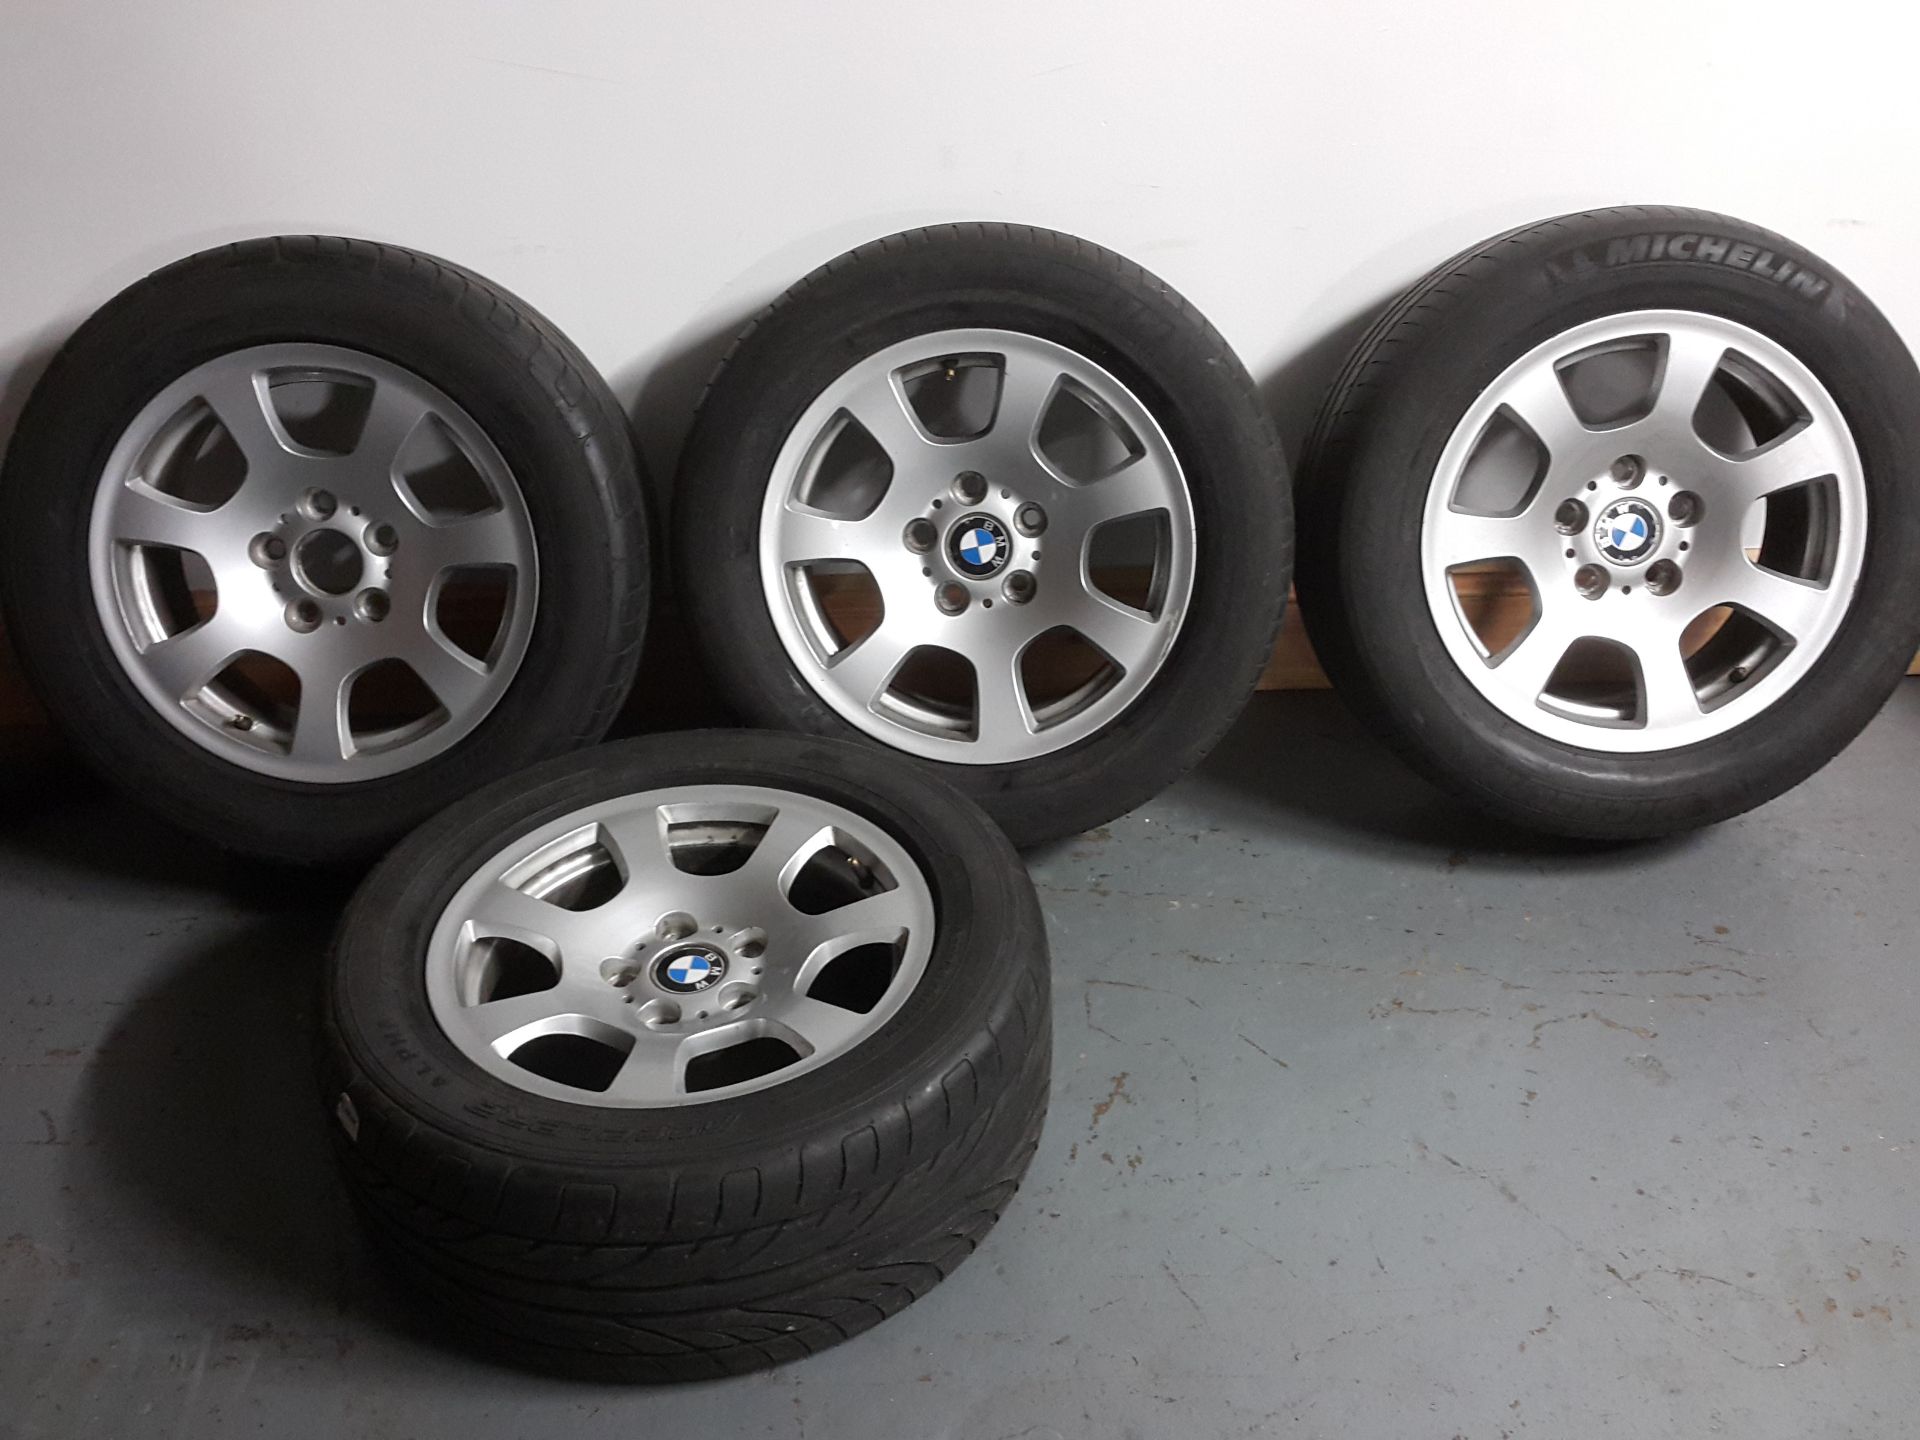 4 X BMW 5 SERIES 16" ALLOY WHEELS WITH TYRES 225/55/R16